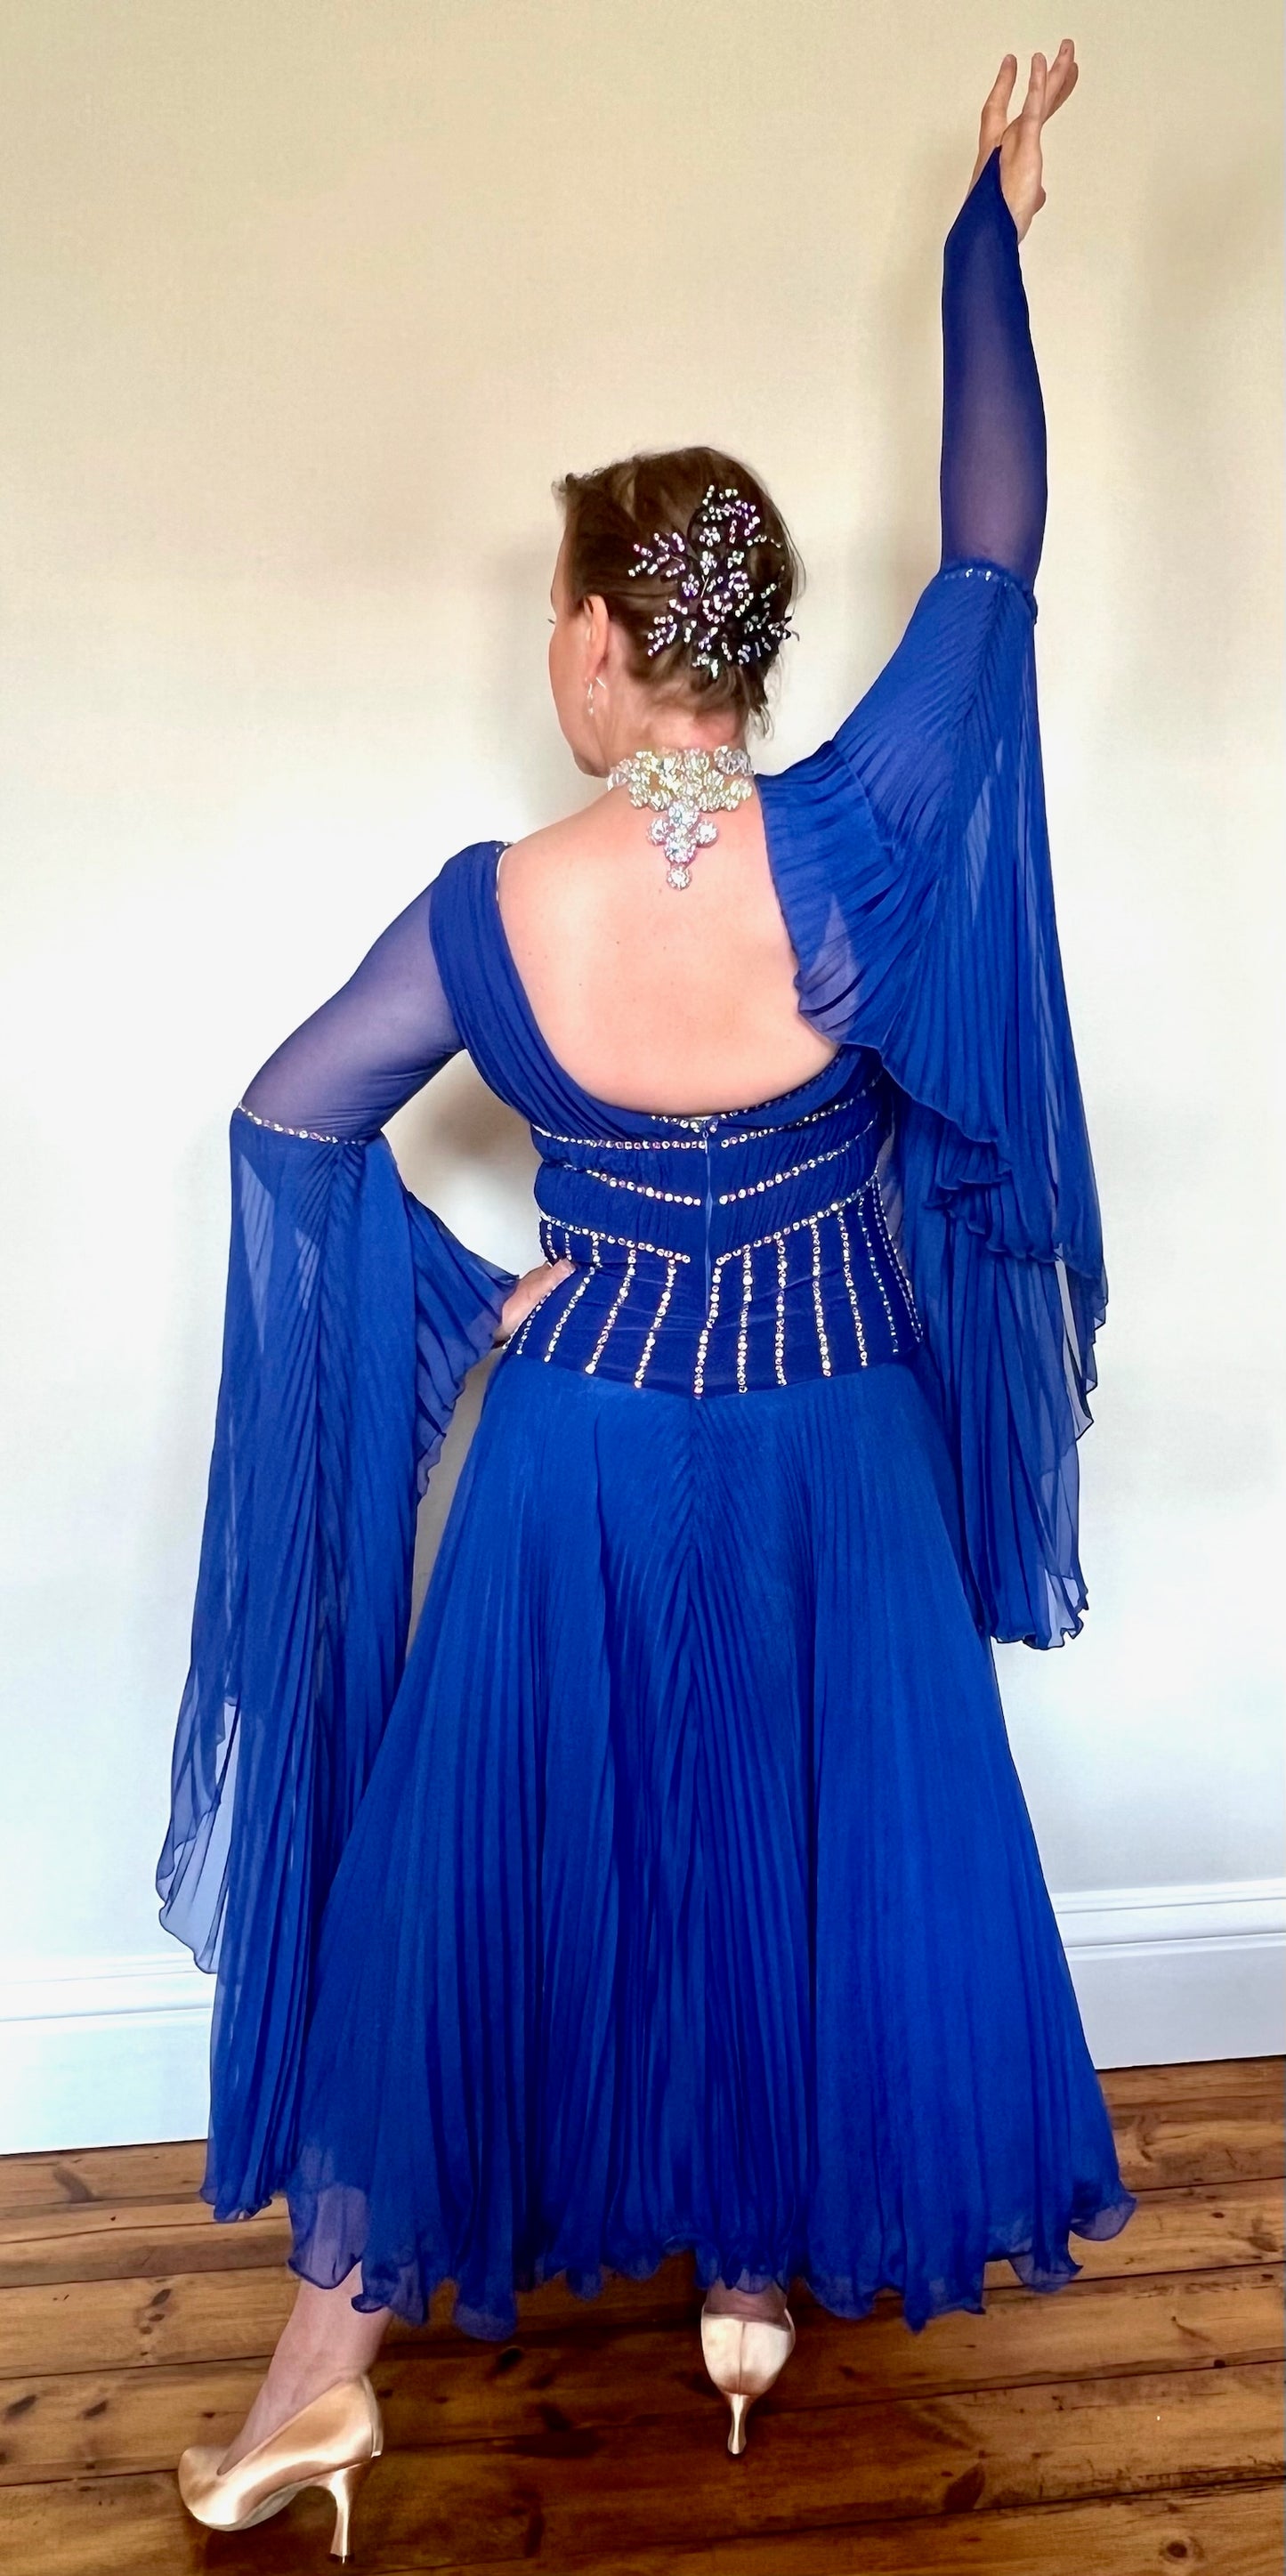 187 Royal Blue Pleated Skirt Ballroom Dress. Full circle pleated cuff detail. Mesh sleeves. Plunge detail bodice with flesh panel. All stones in AB